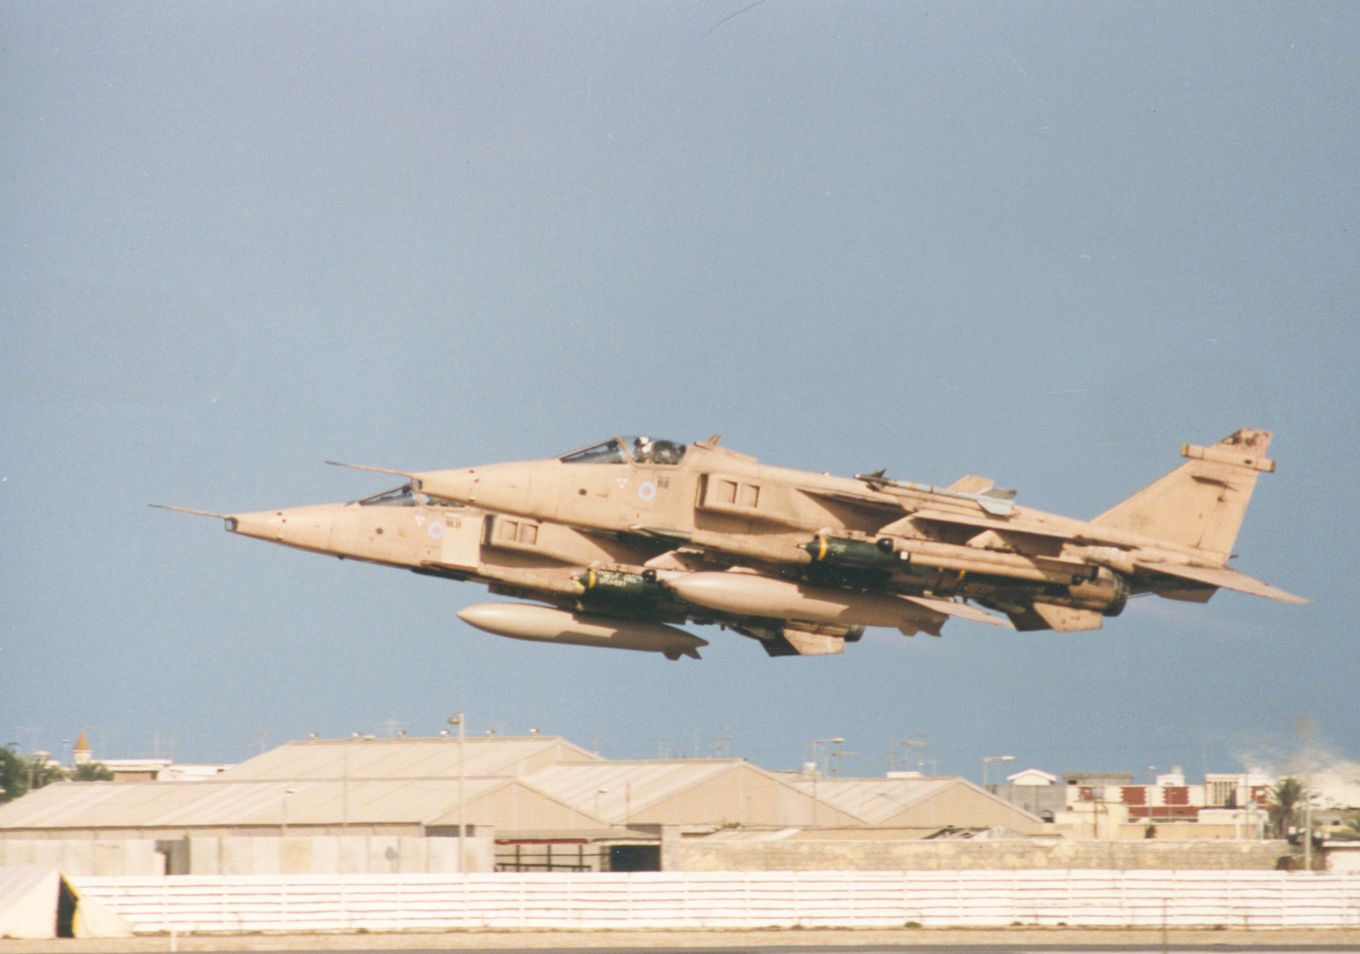 Image shows two RAF Jaguar aircraft taking off.